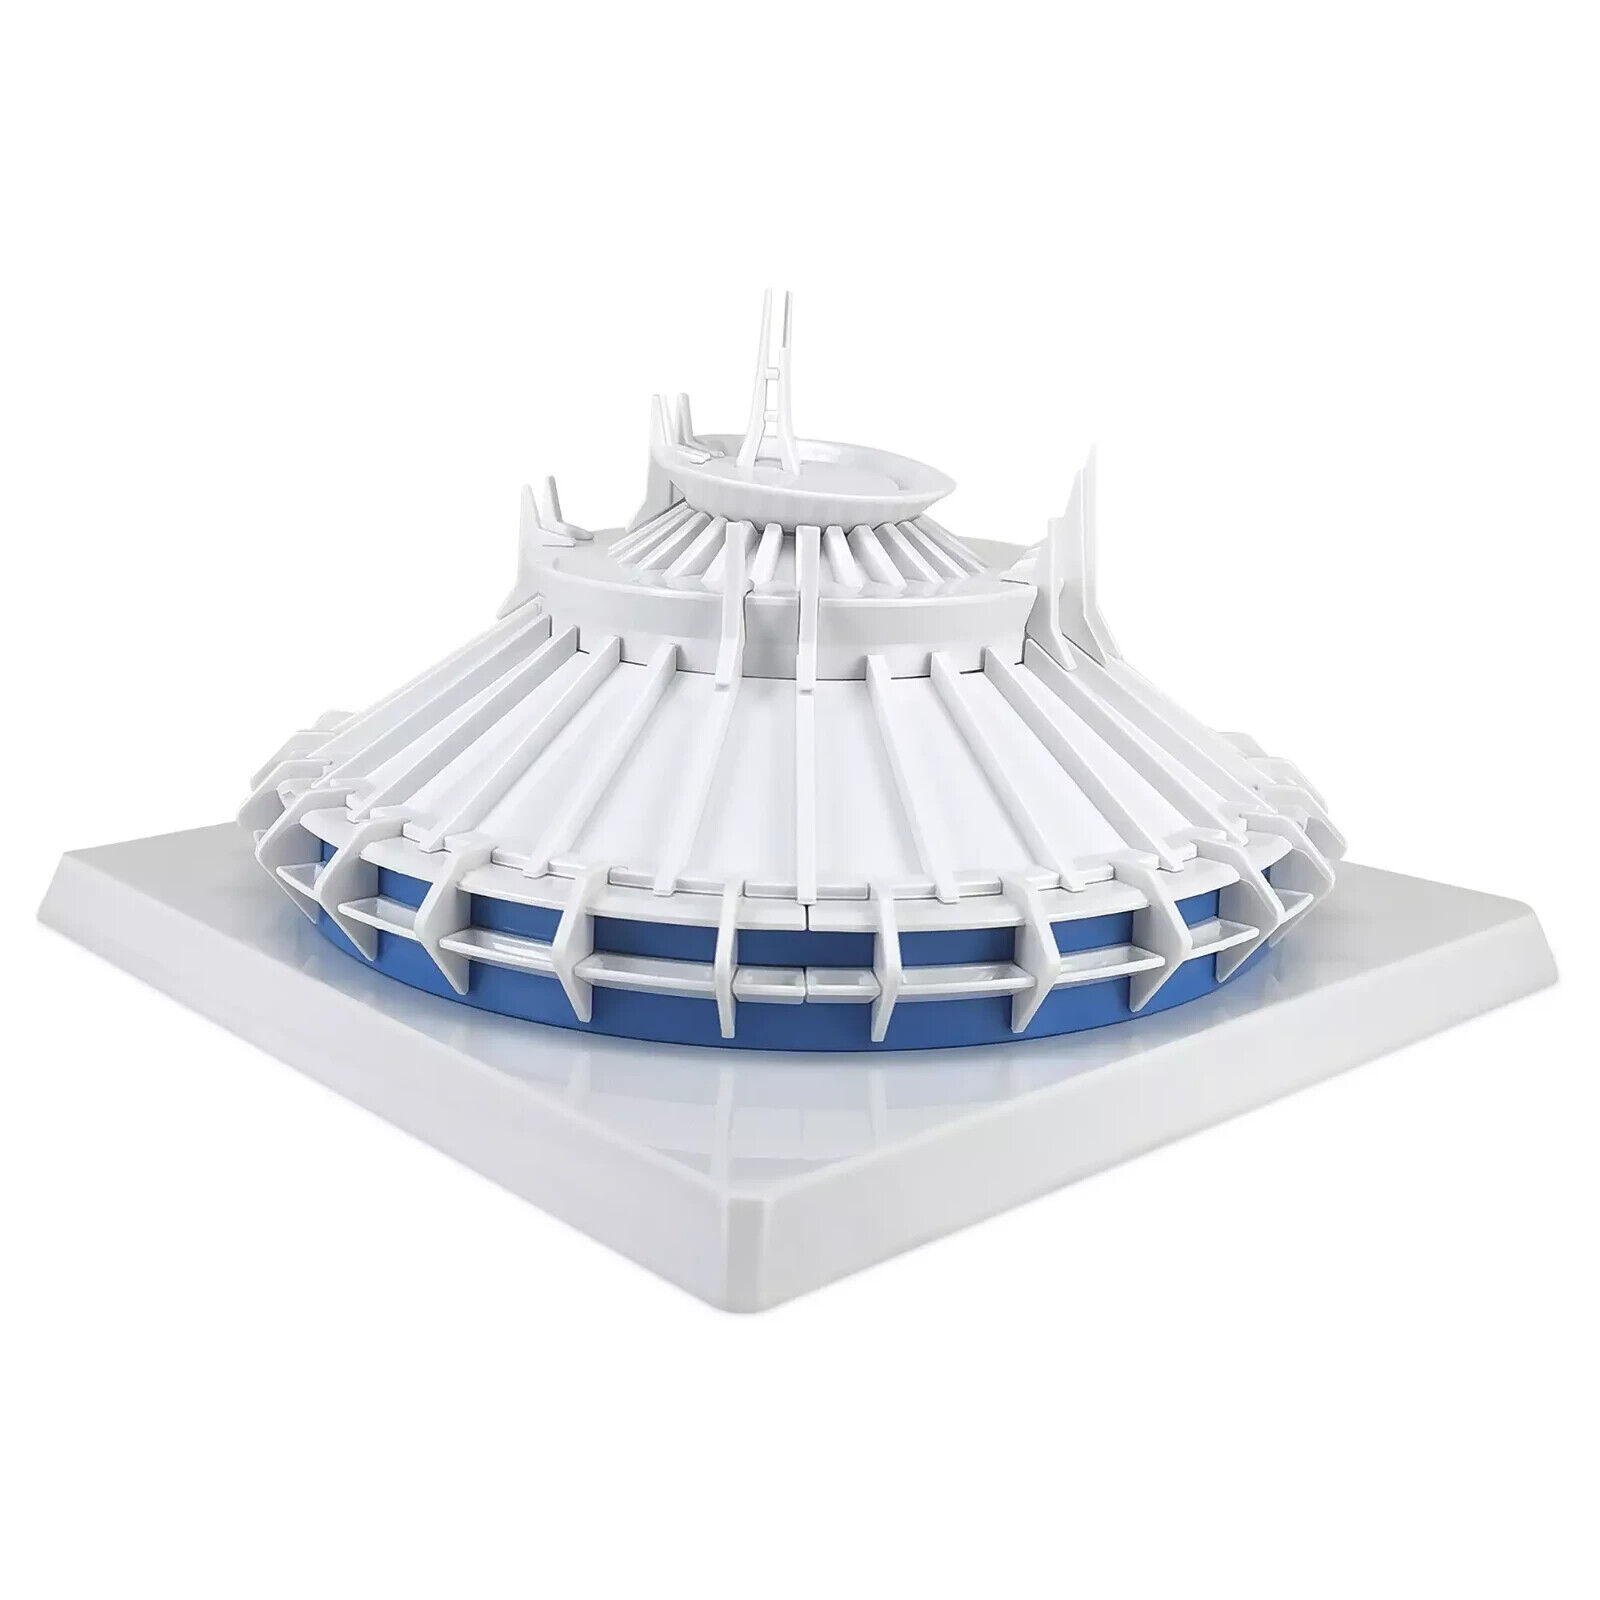 Disney Parks Space Mountain DIY Model Kit Build Display 27 Pieces New in Box